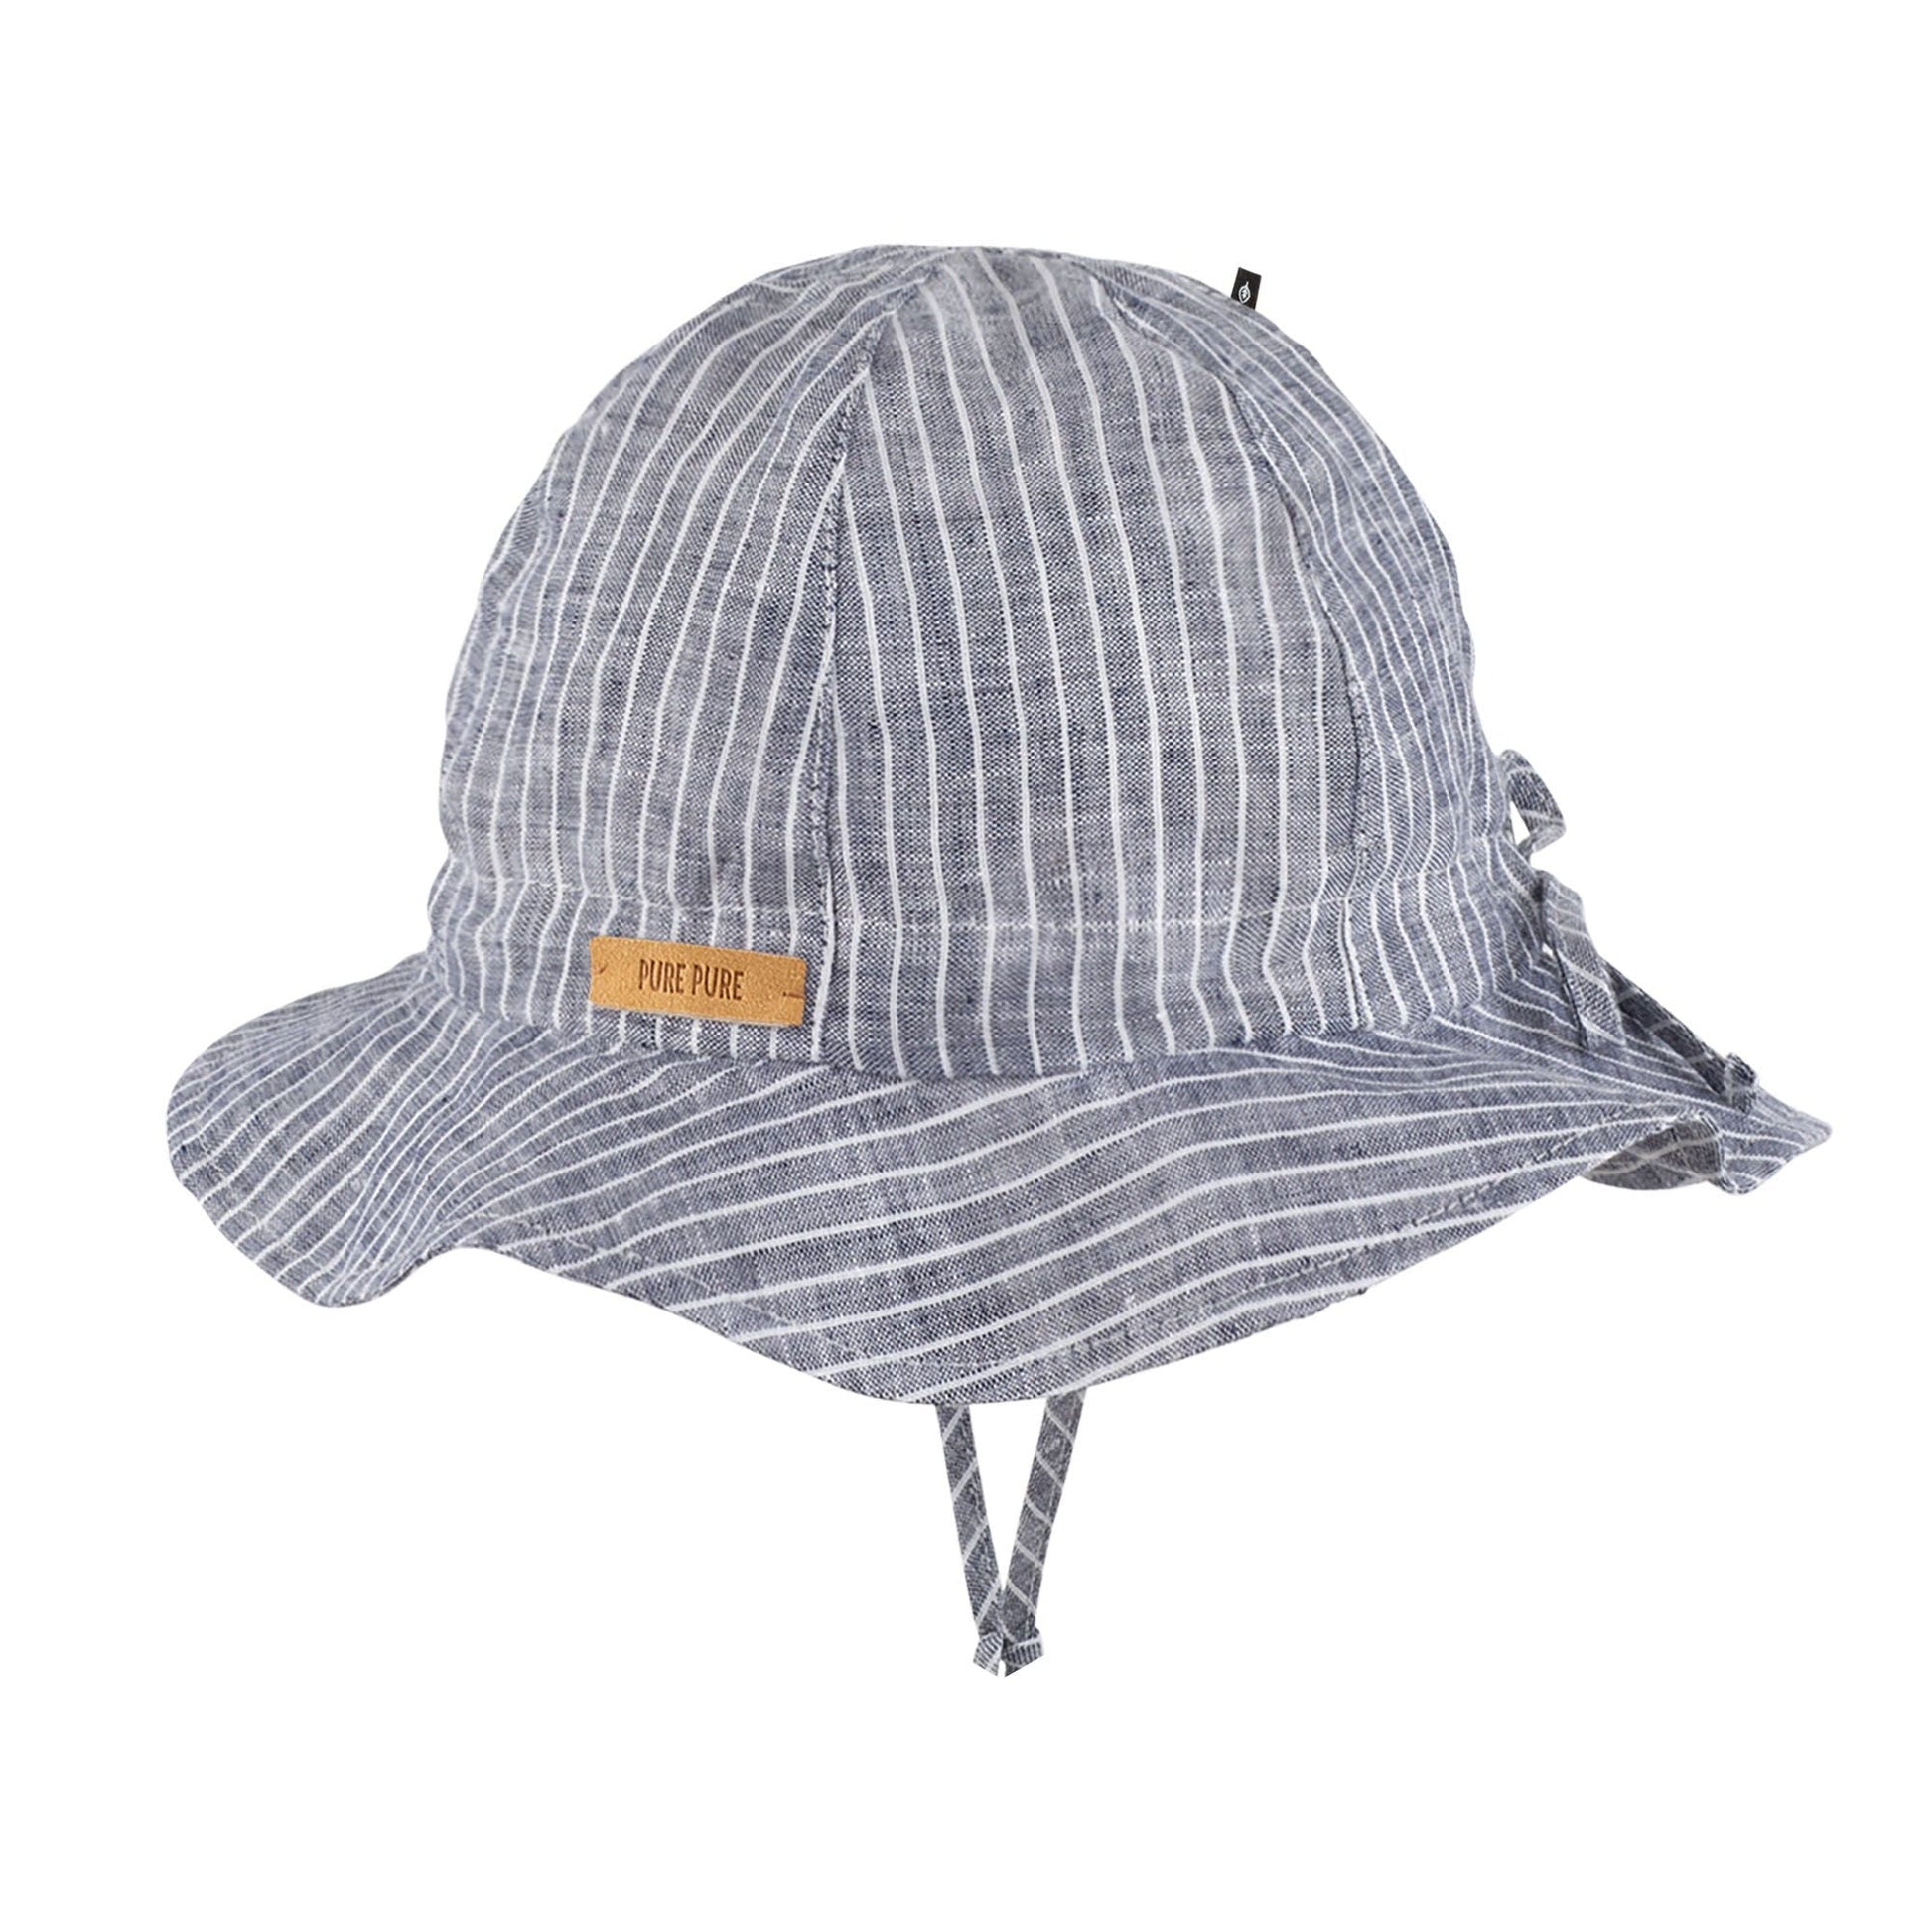 Linen Sun Hat - Baby and Toddler - Bucket Hat (2 colors) - Nature's Wild Child